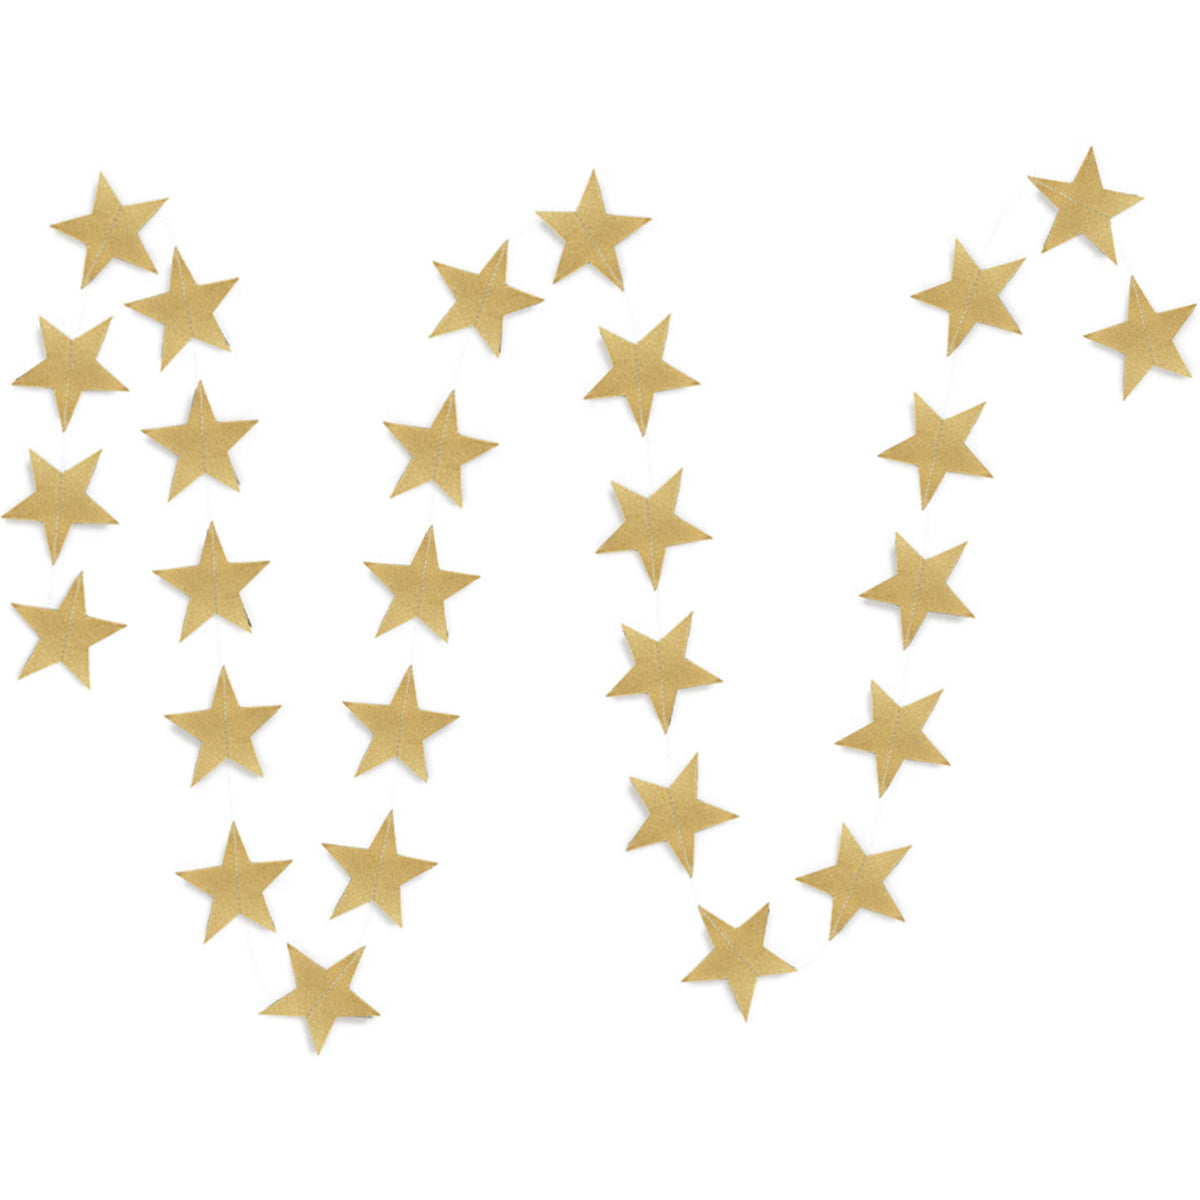 A string of gold stars paper garland show with a white background. 